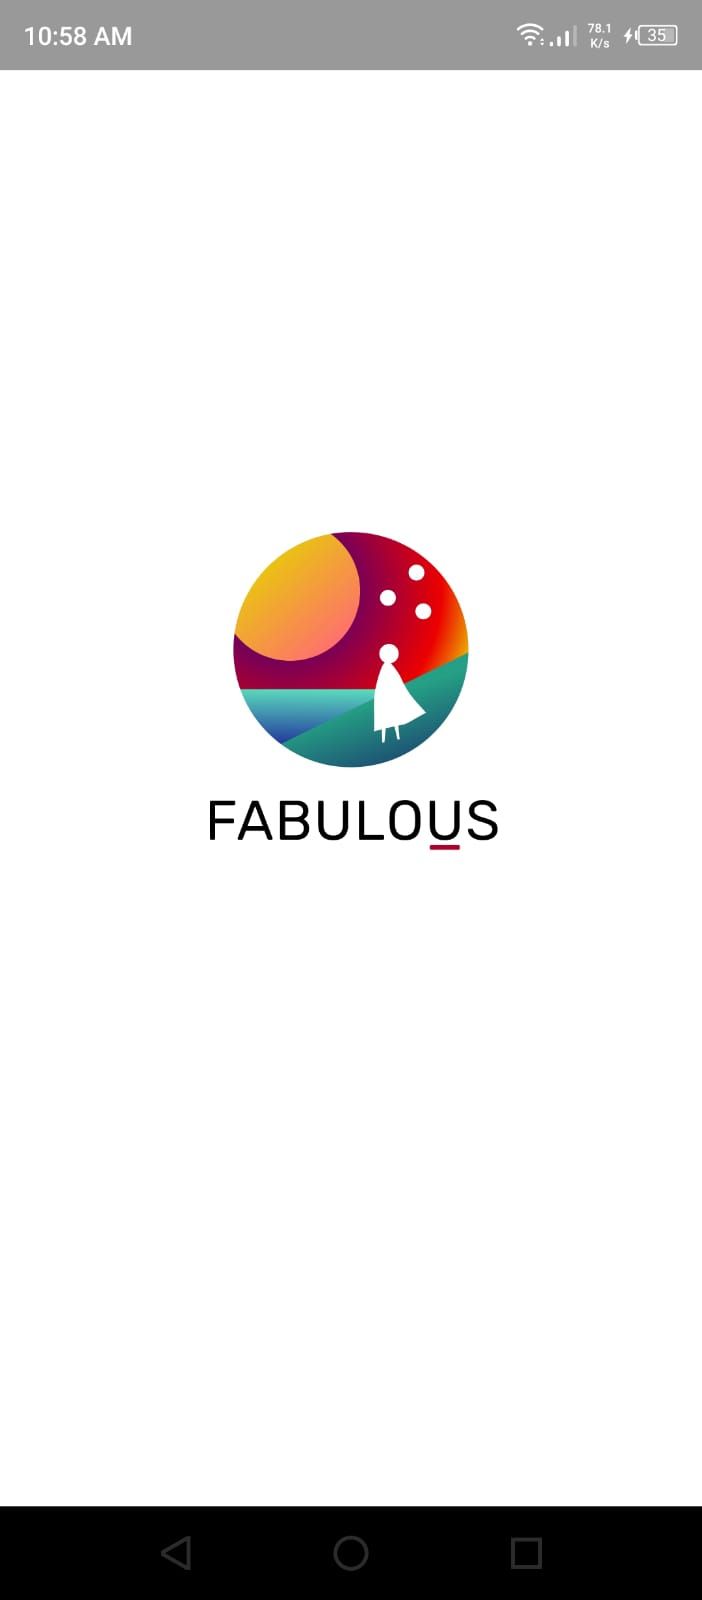 Fabulous Daily Routine Planner - Welcome Screen